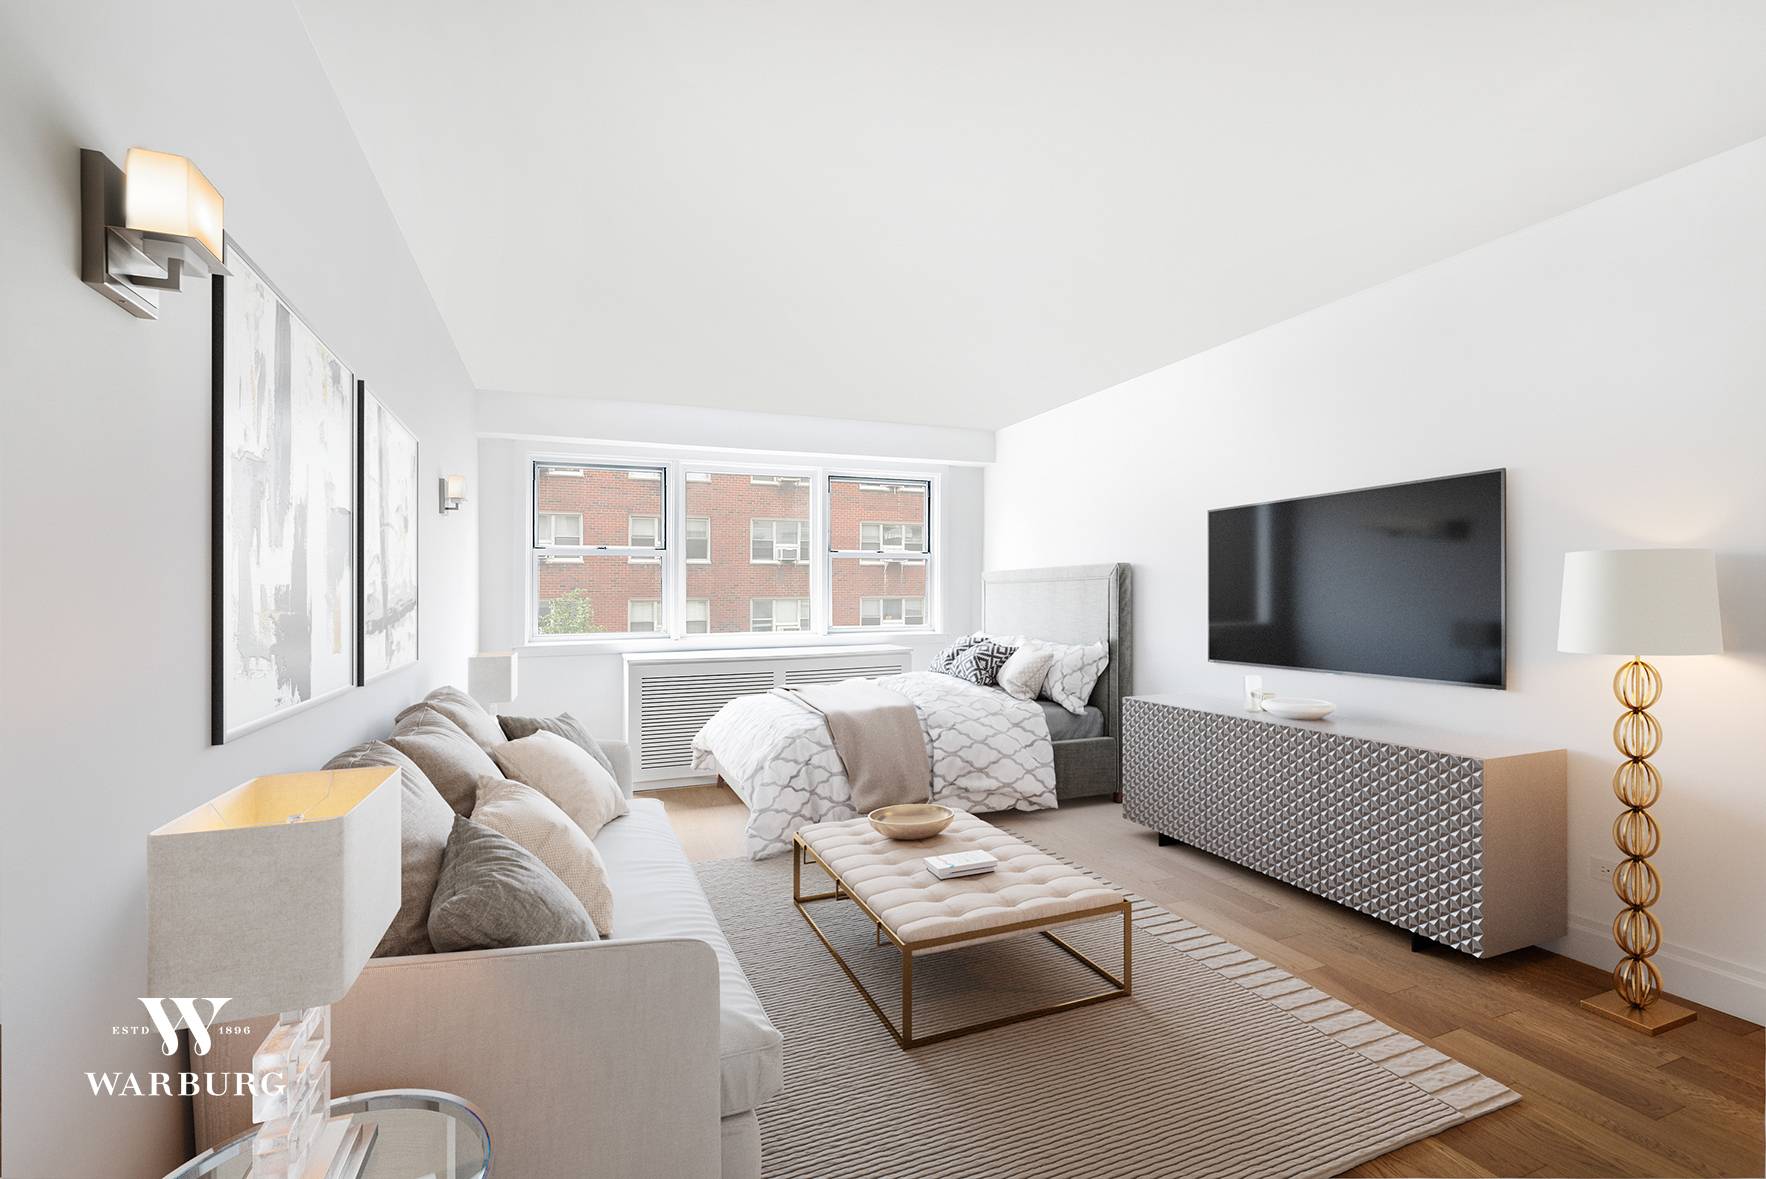 No Board approval is required for this brand newly renovated studio apartment in the Townsley, a full service cooperative building in Murray Hill.